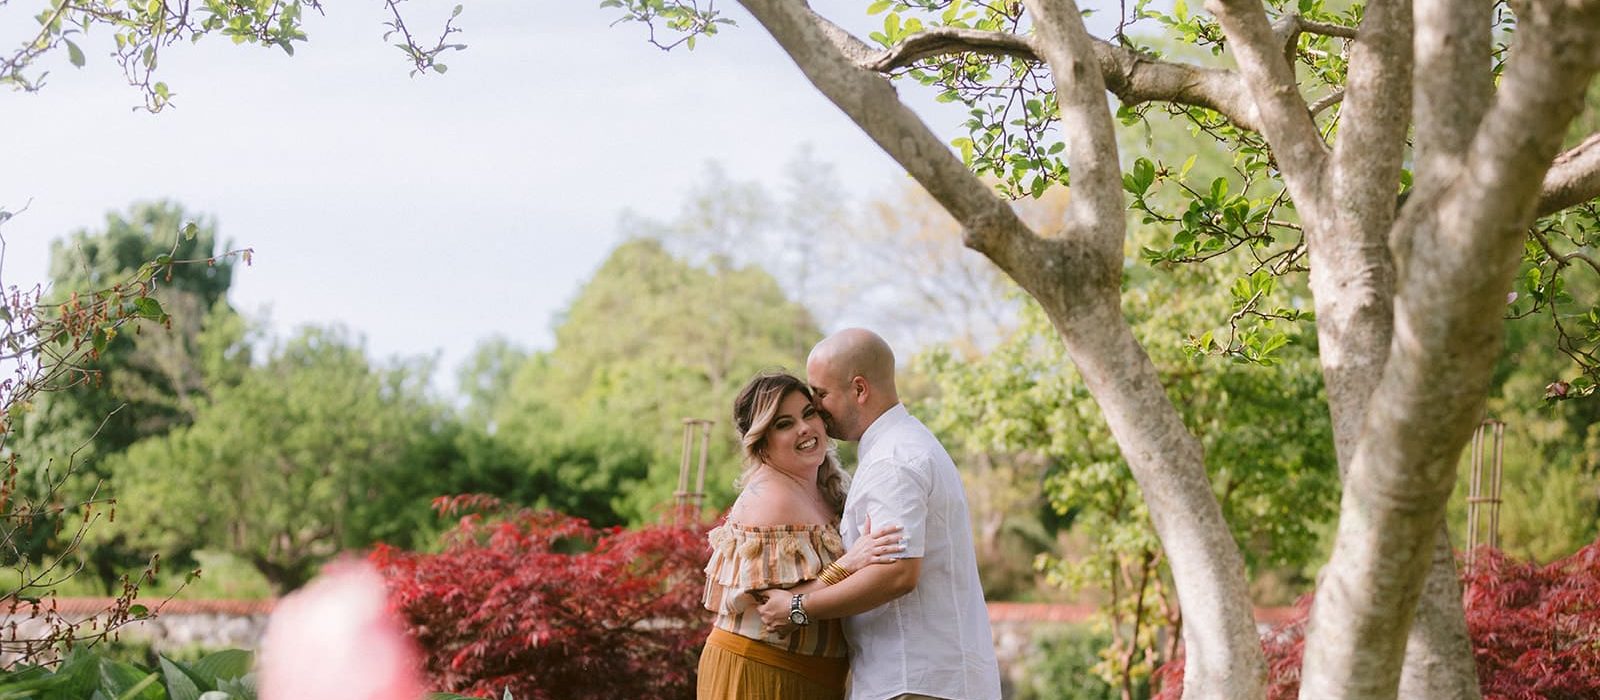 Newly engaged couple hugging one another laughing while standing outside on garden path